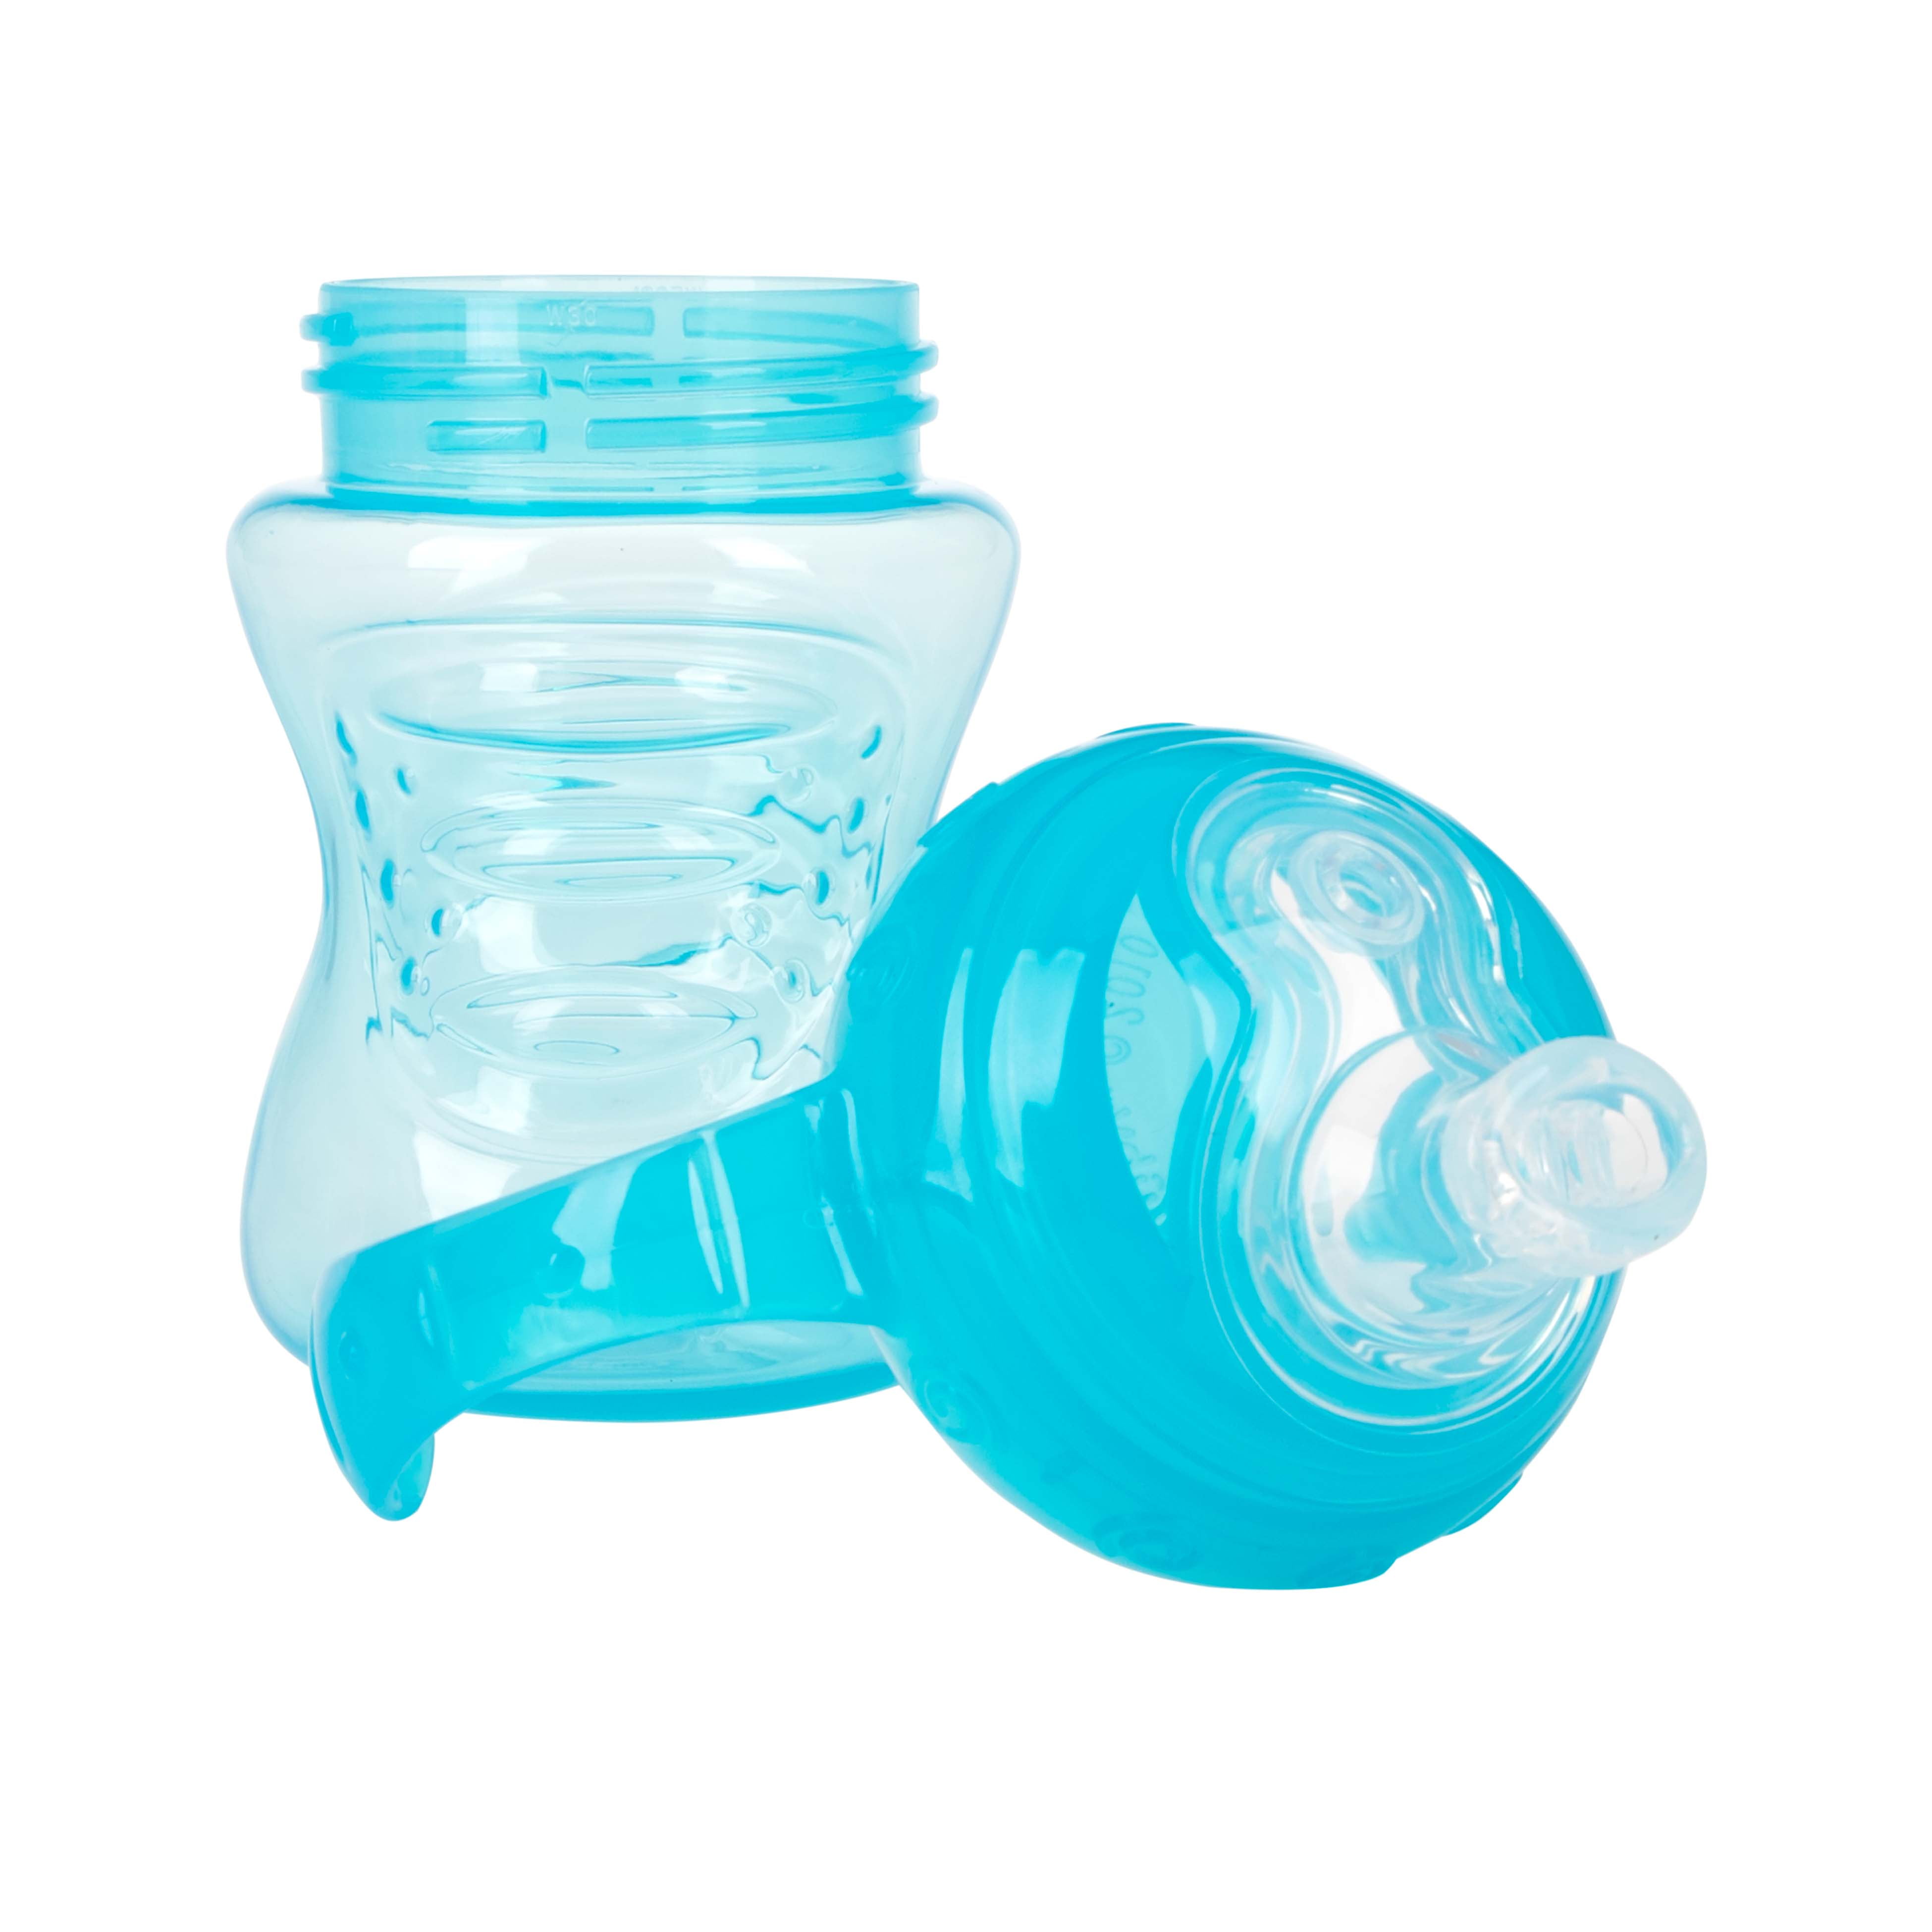 Nuby No Spill Cup, 1 ct - Dillons Food Stores